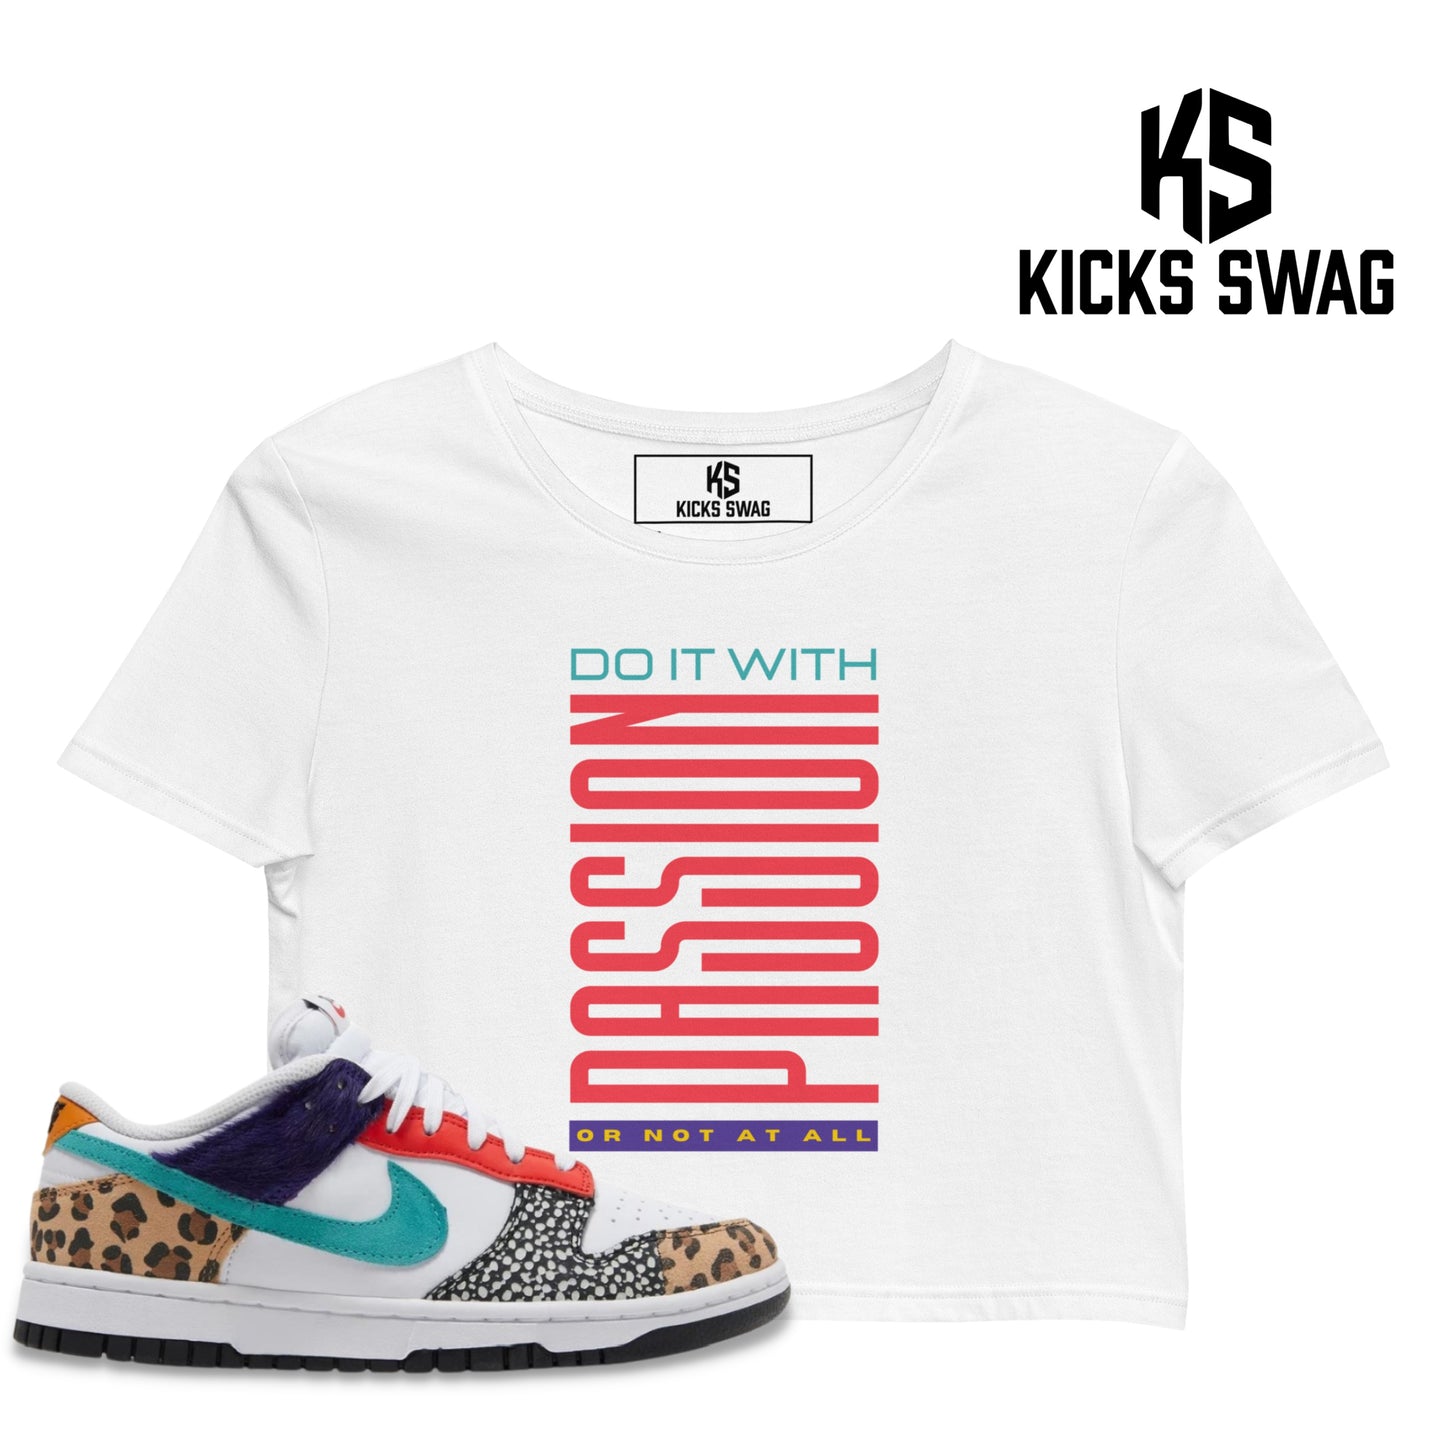 Crop Top - Nike dunk low safari mix (Do it with passion or not at all)